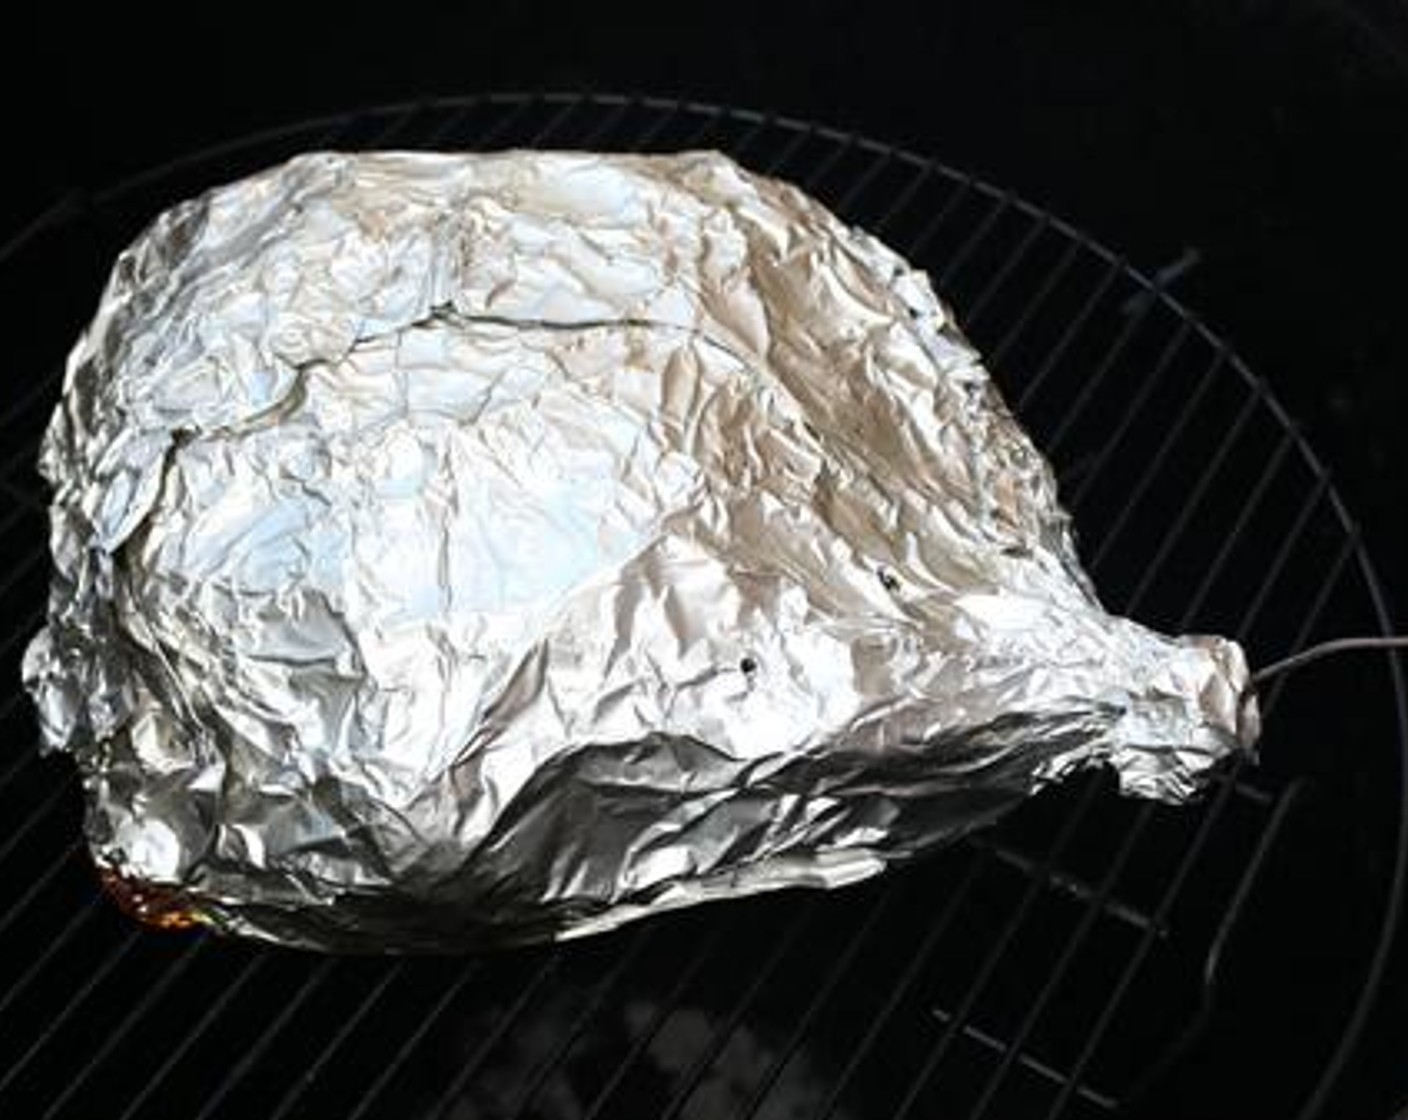 step 5 Wrap Boston Butt in 2-3 layers of aluminum foil. Apply a light coat of rub and baste before closing foil.